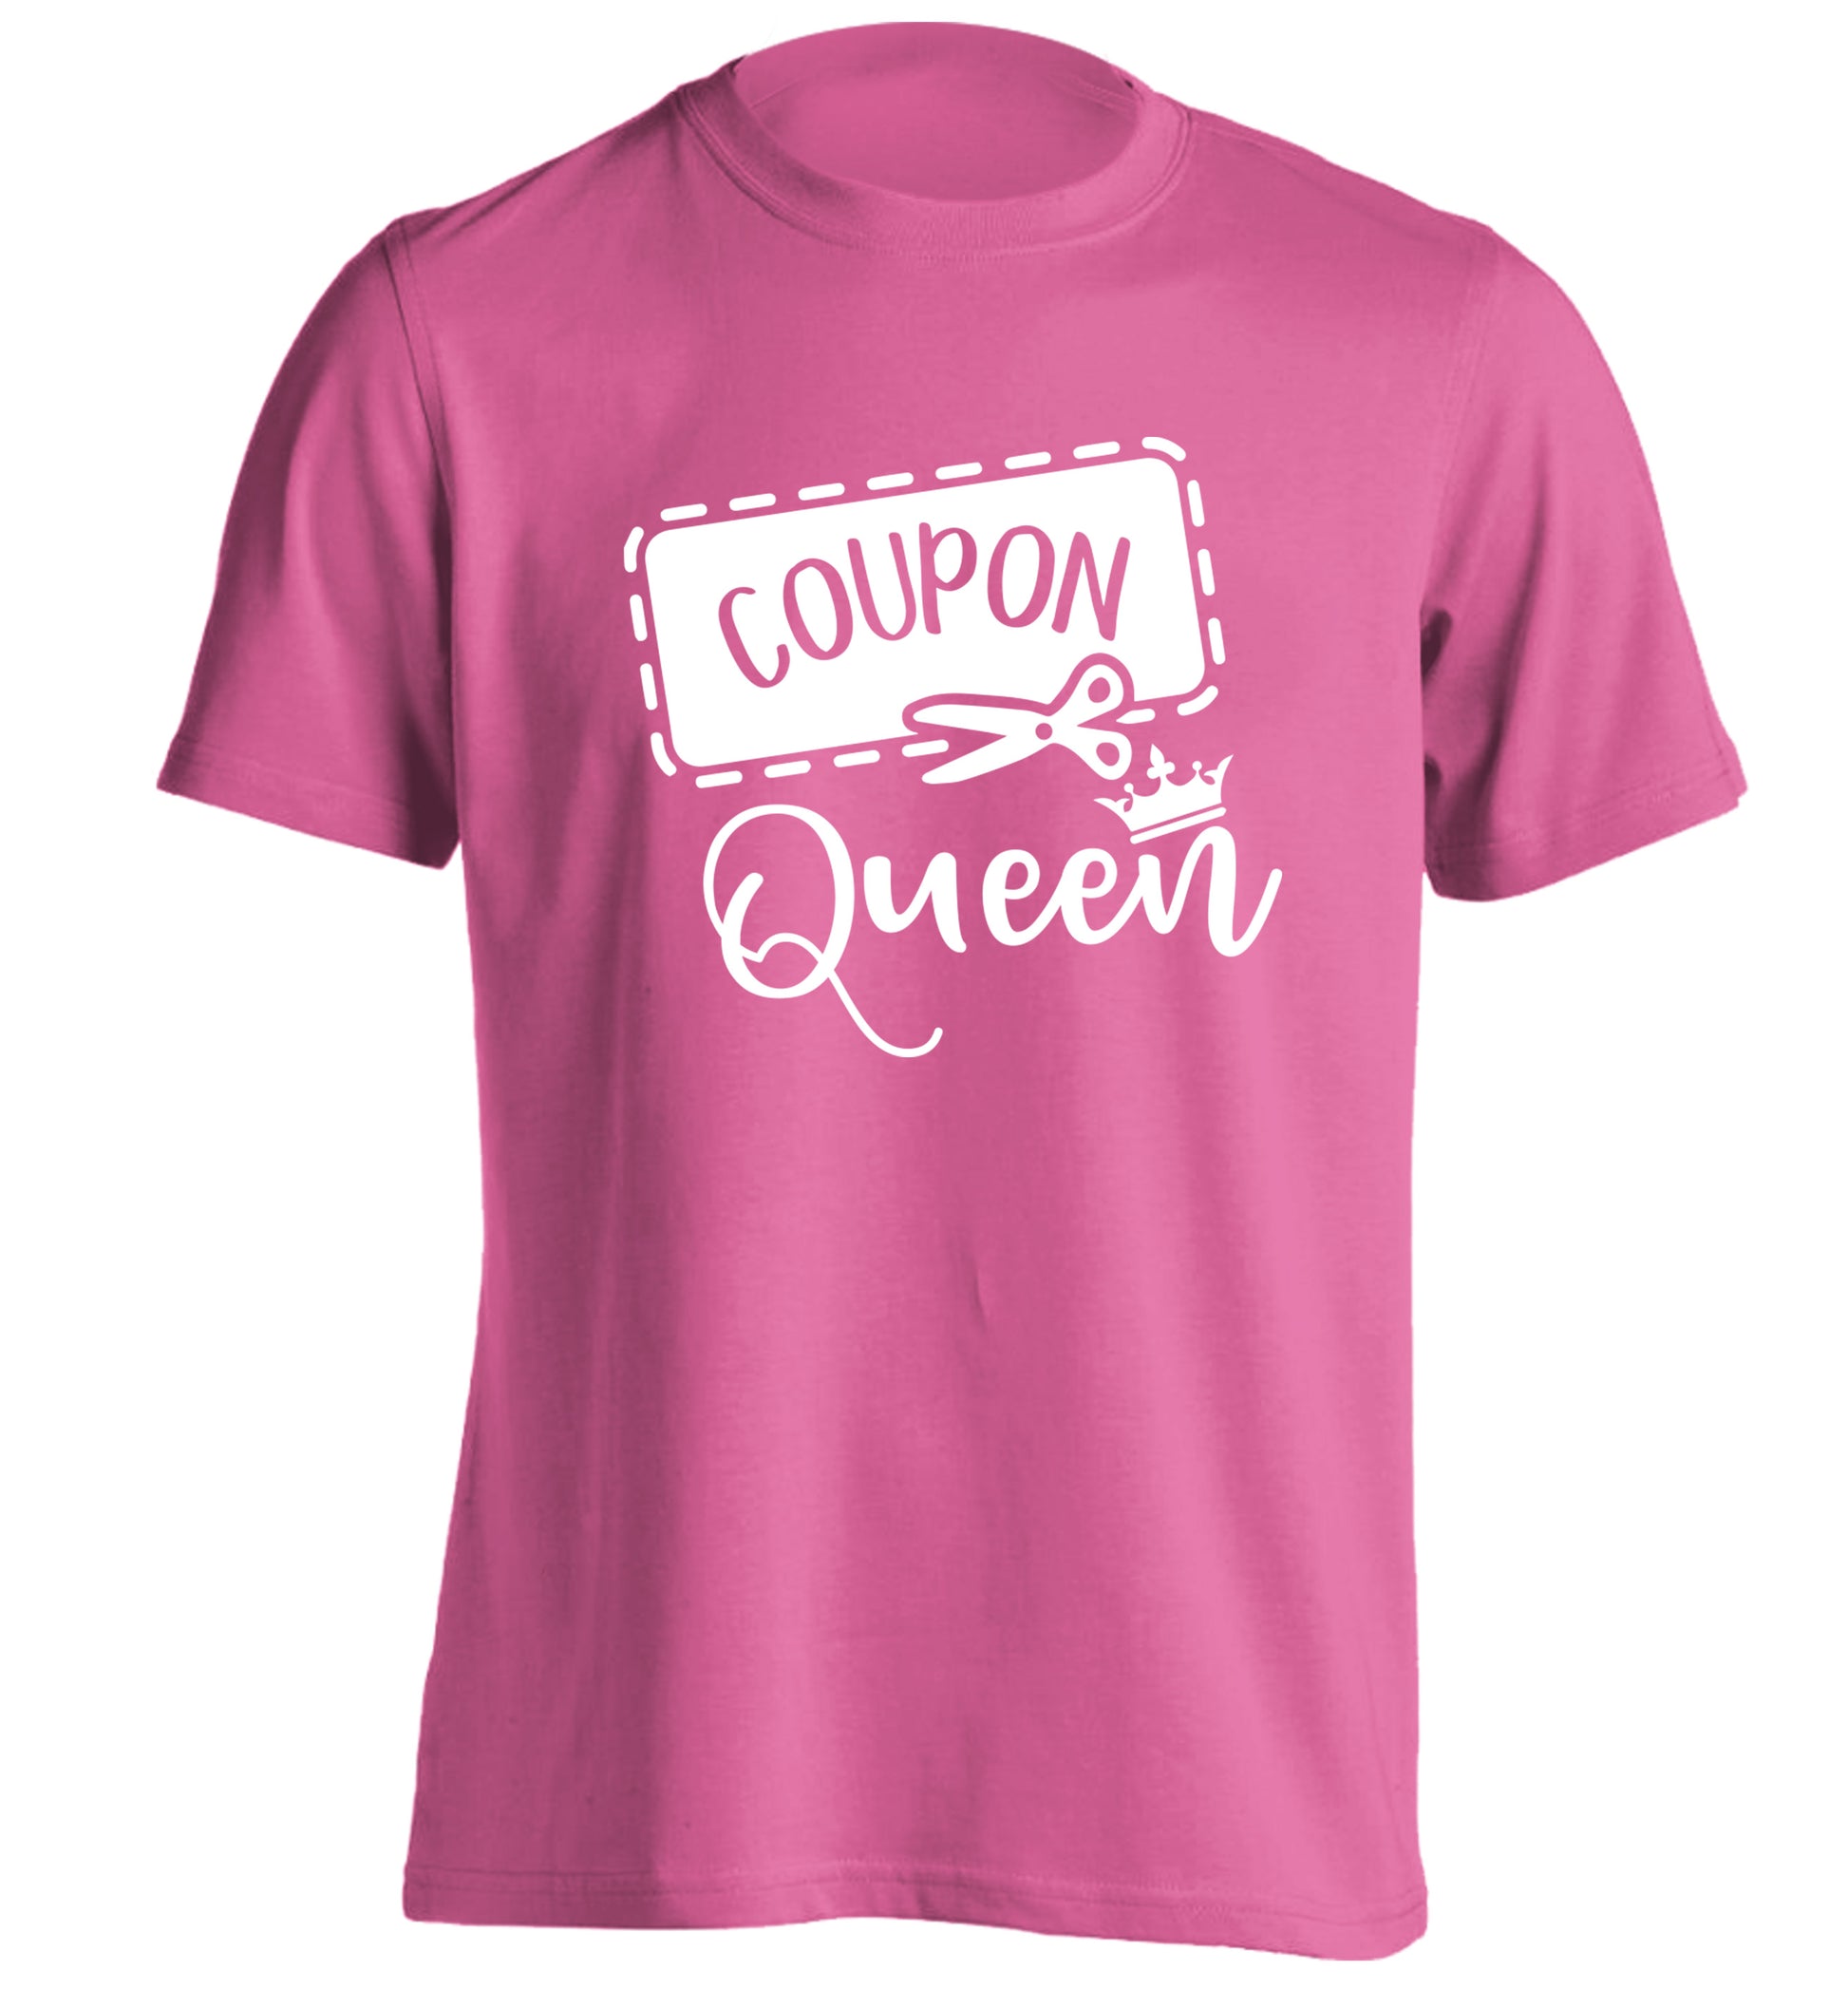 Coupon Queen adults unisex pink Tshirt 2XL